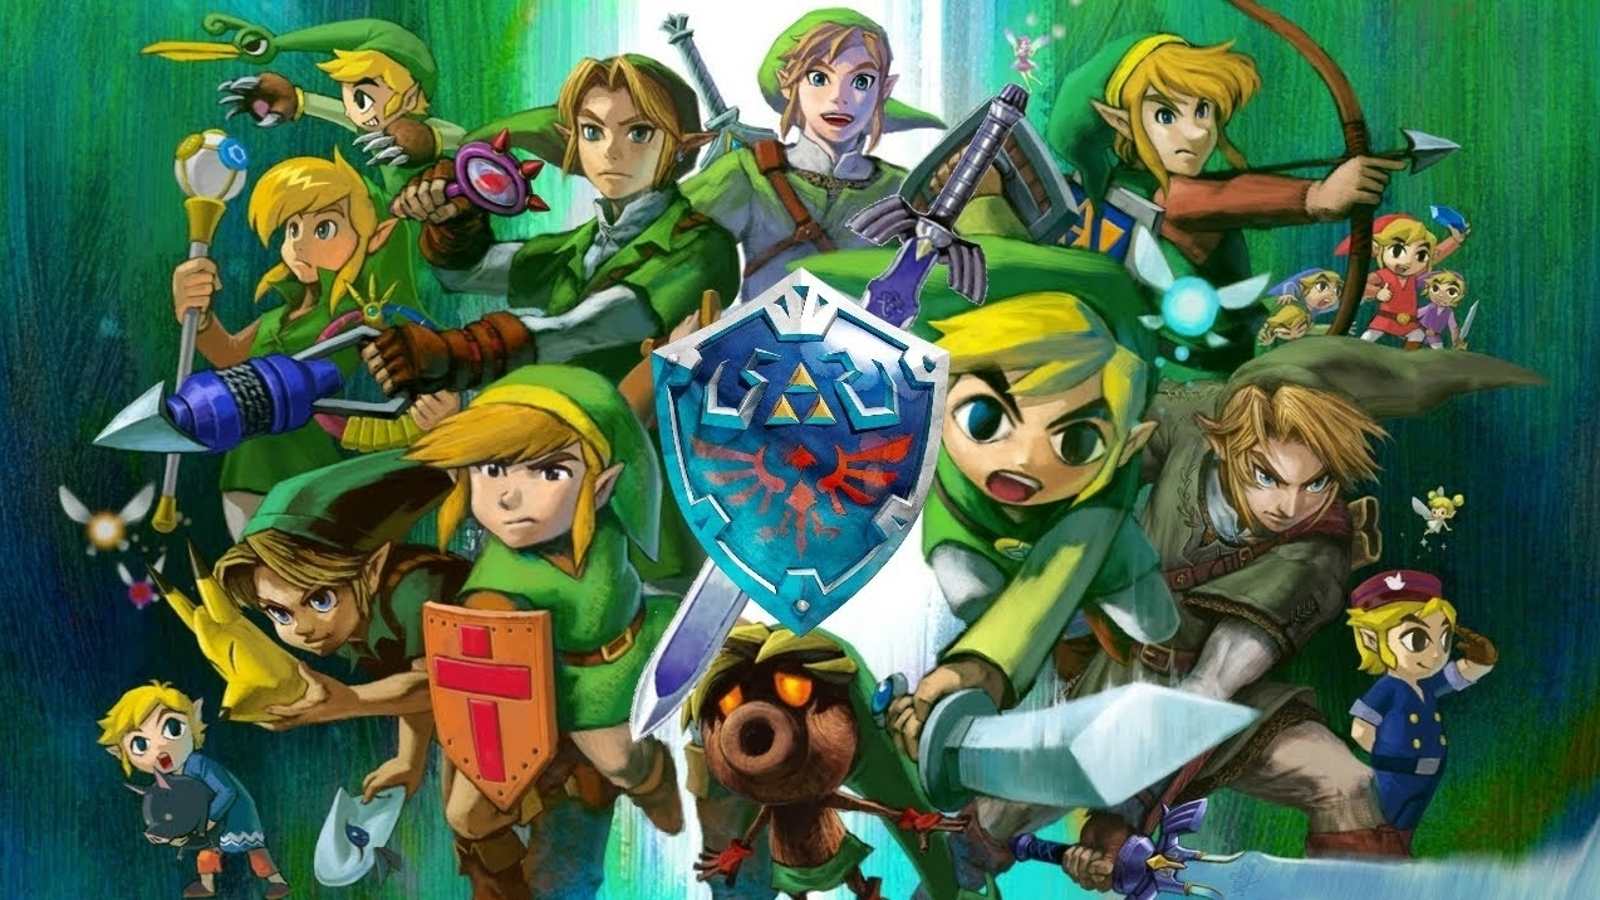 After 35 Years, Which Version of Link and Zelda Is The Best?